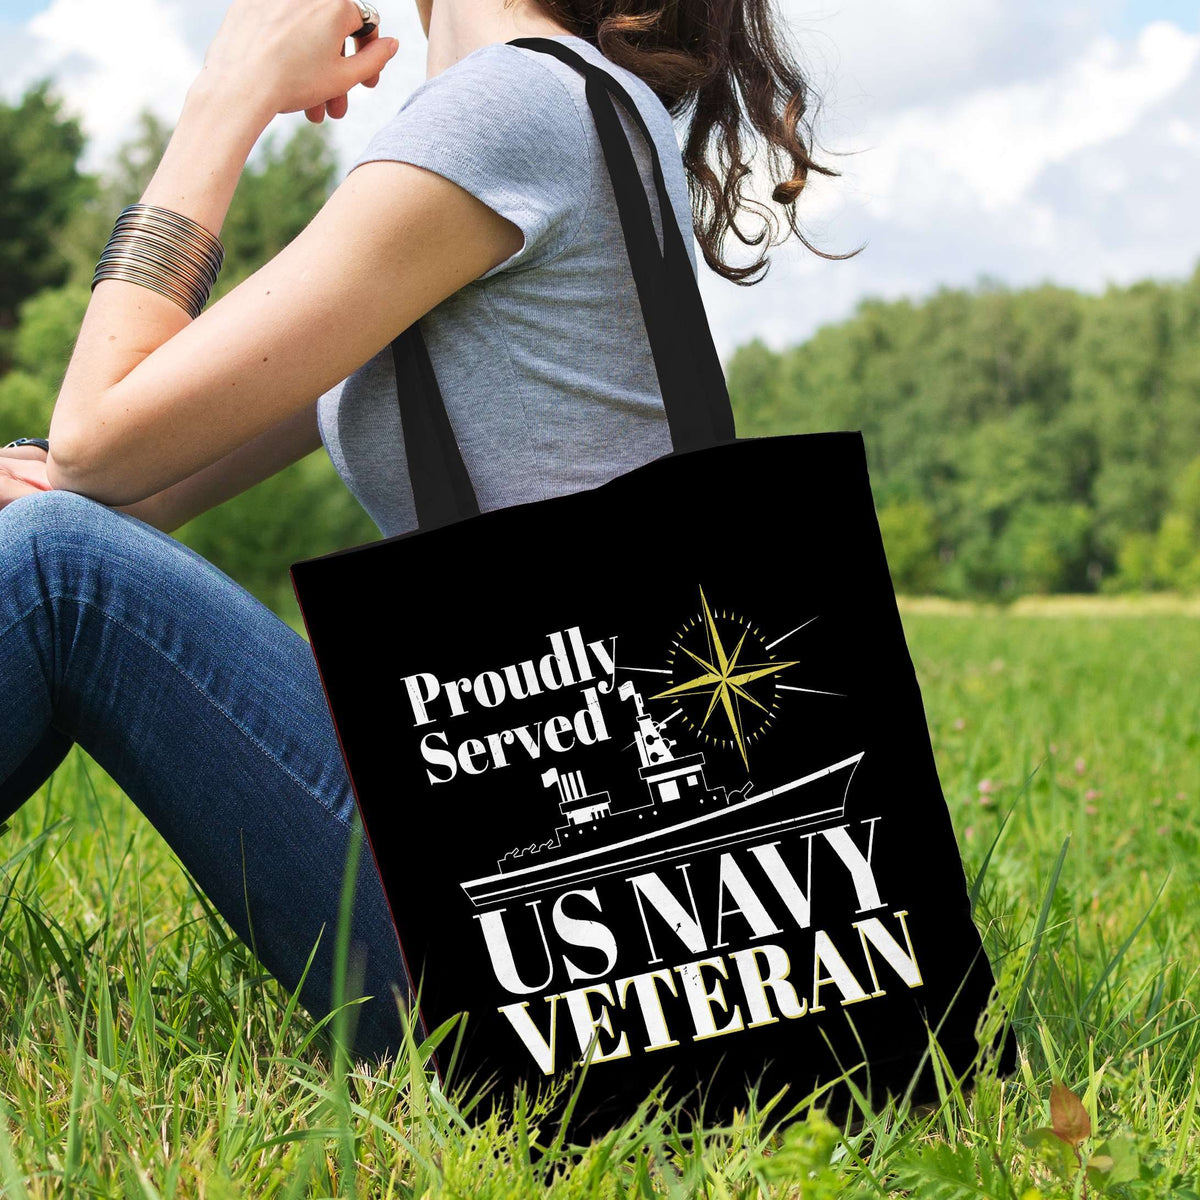 Designs by MyUtopia Shout Out:Proudly Served US Navy Veteran Fabric Totebag Reusable Shopping Tote